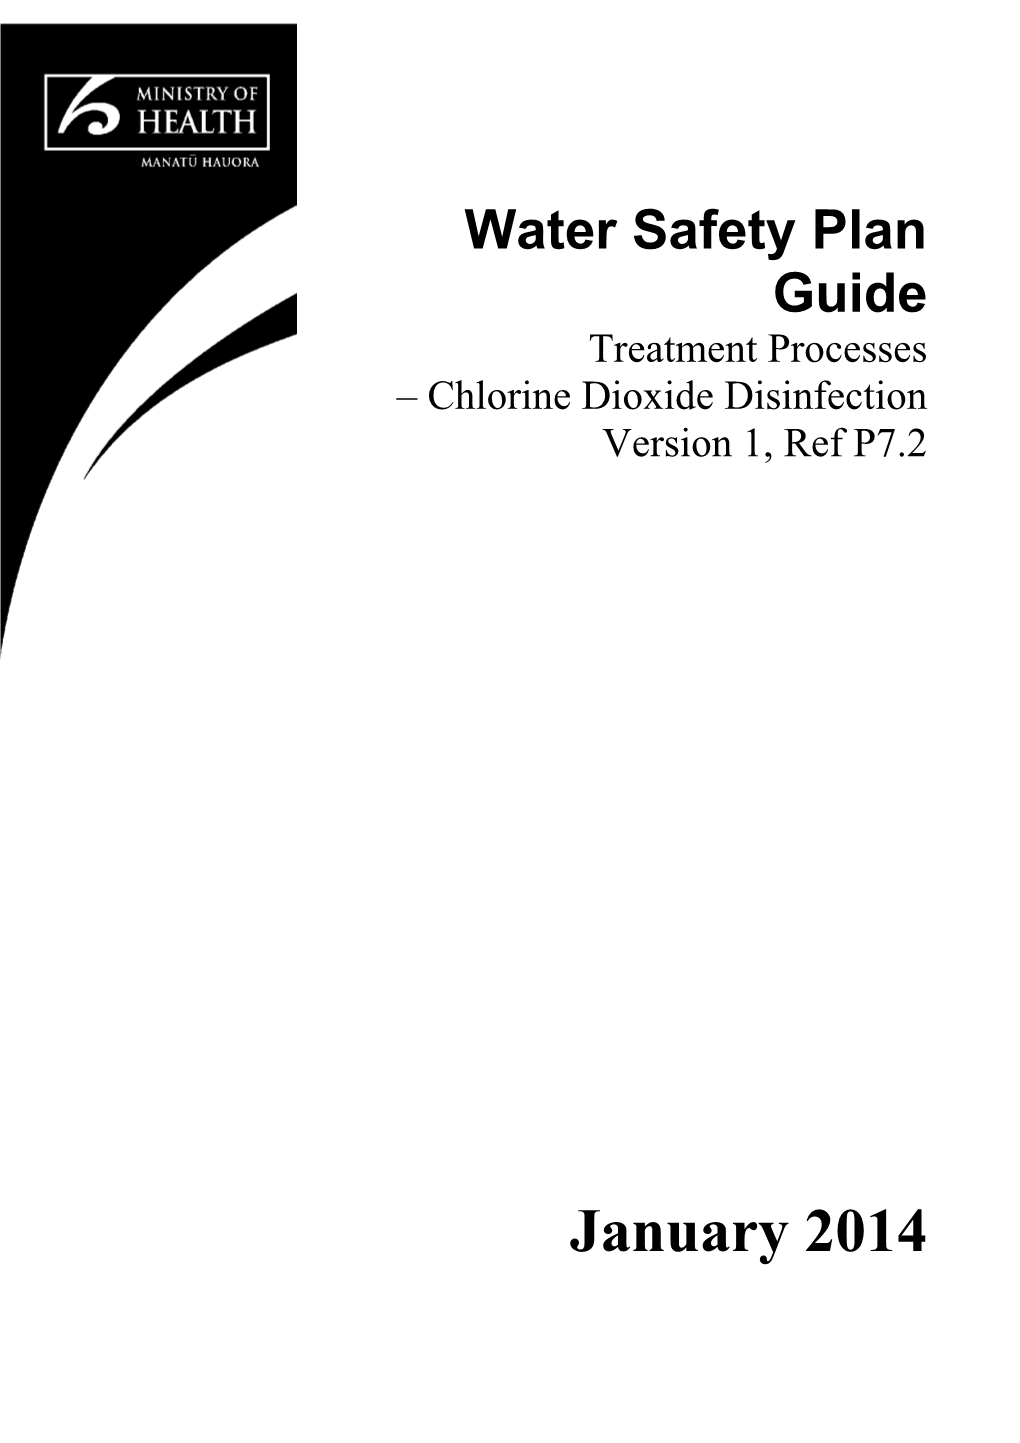 Water Safety Plan Guide: Treatment Processes Chlorine Dioxide Disinfection